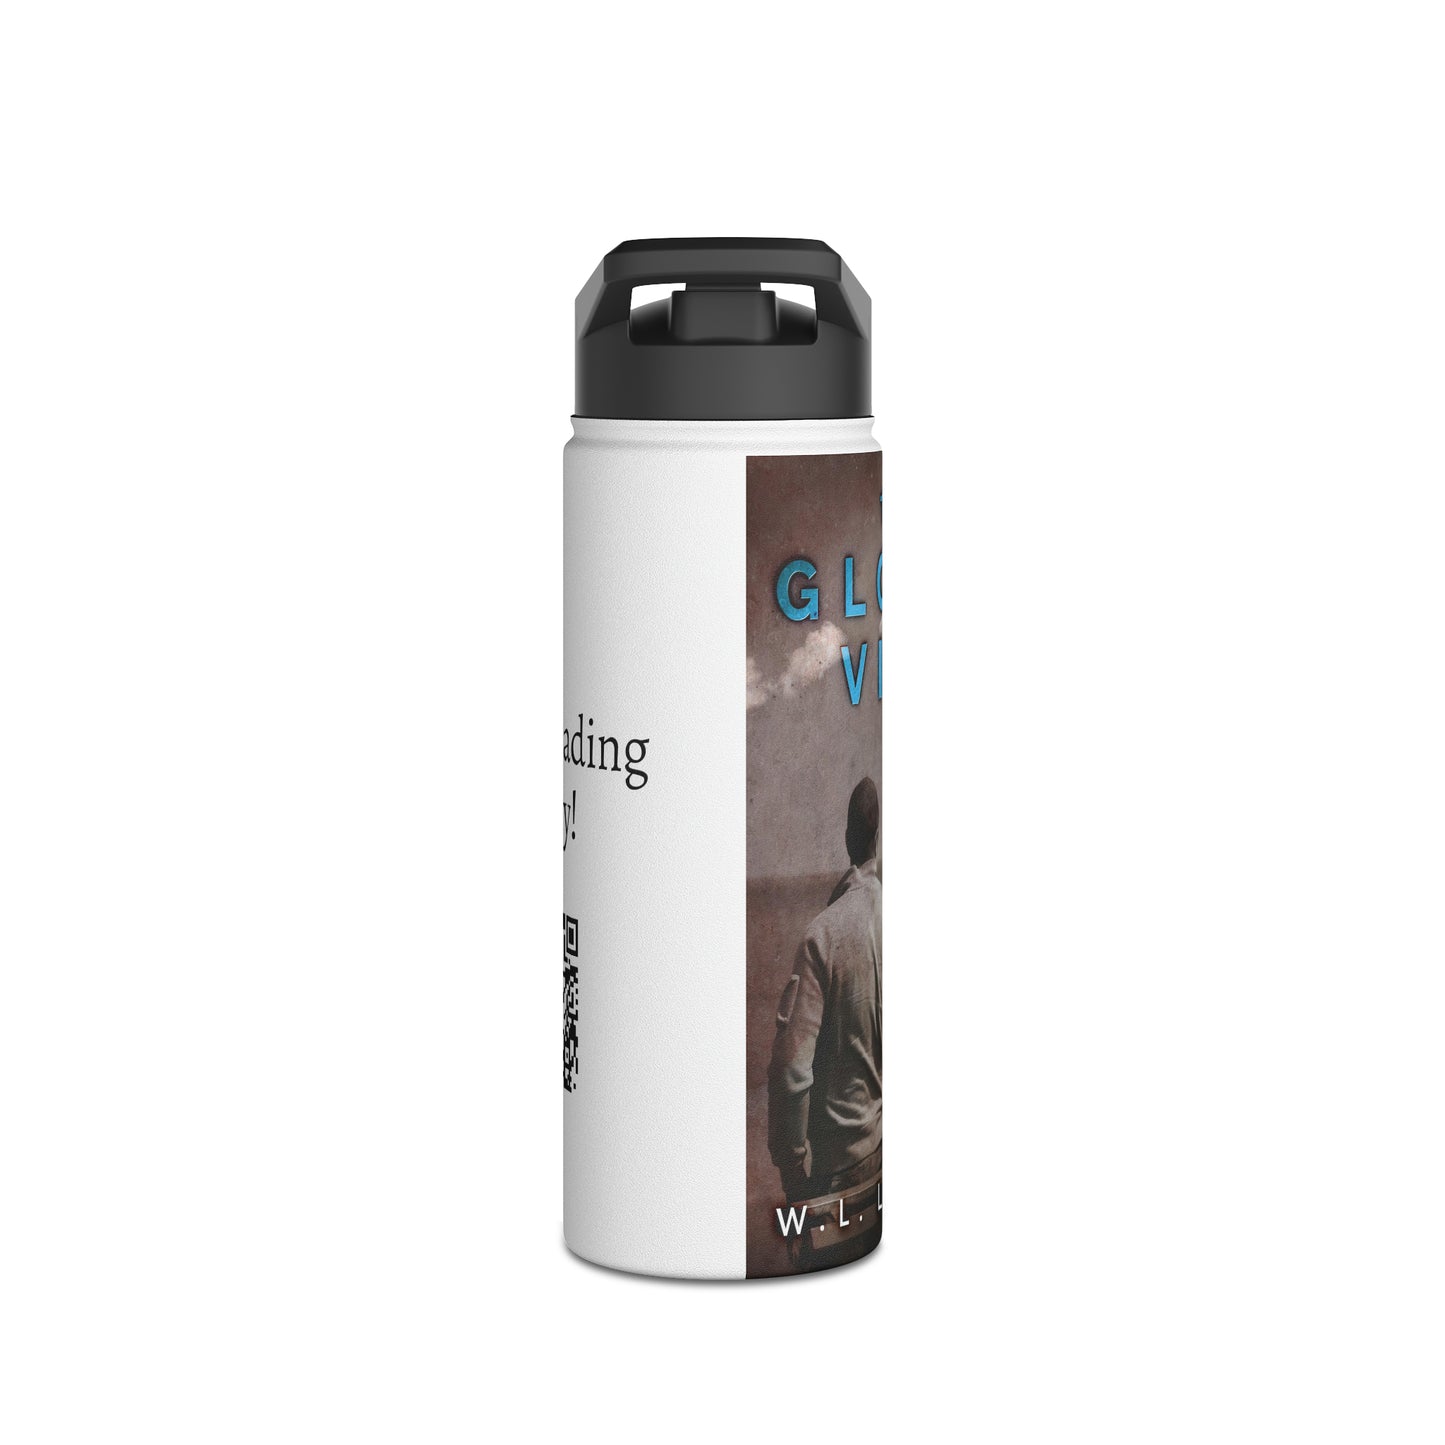 The Global View - Stainless Steel Water Bottle